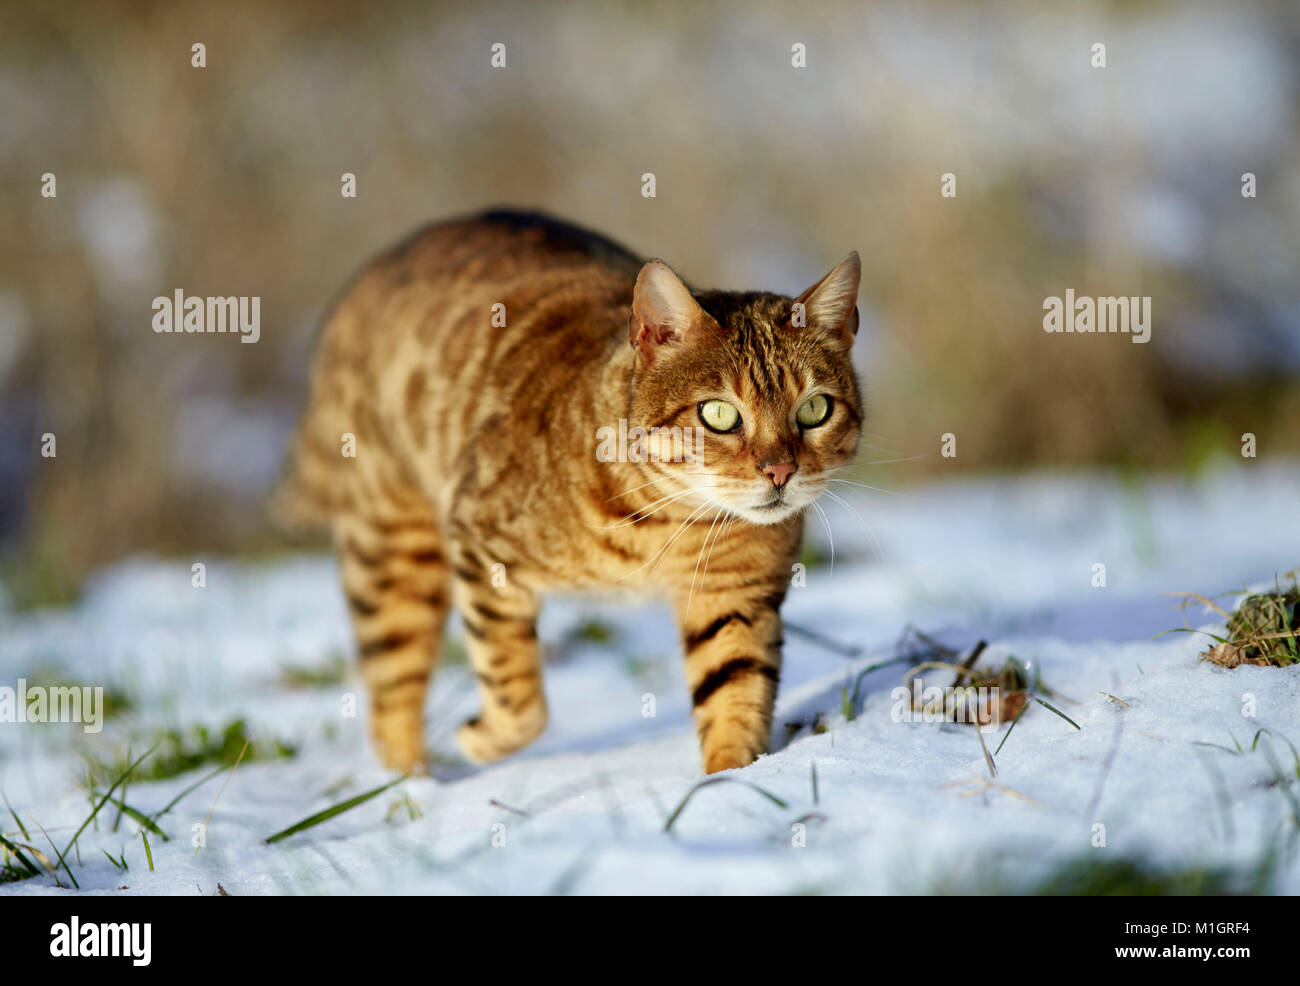 Bengal cat. Adult walking on snow. Germany Stock Photo